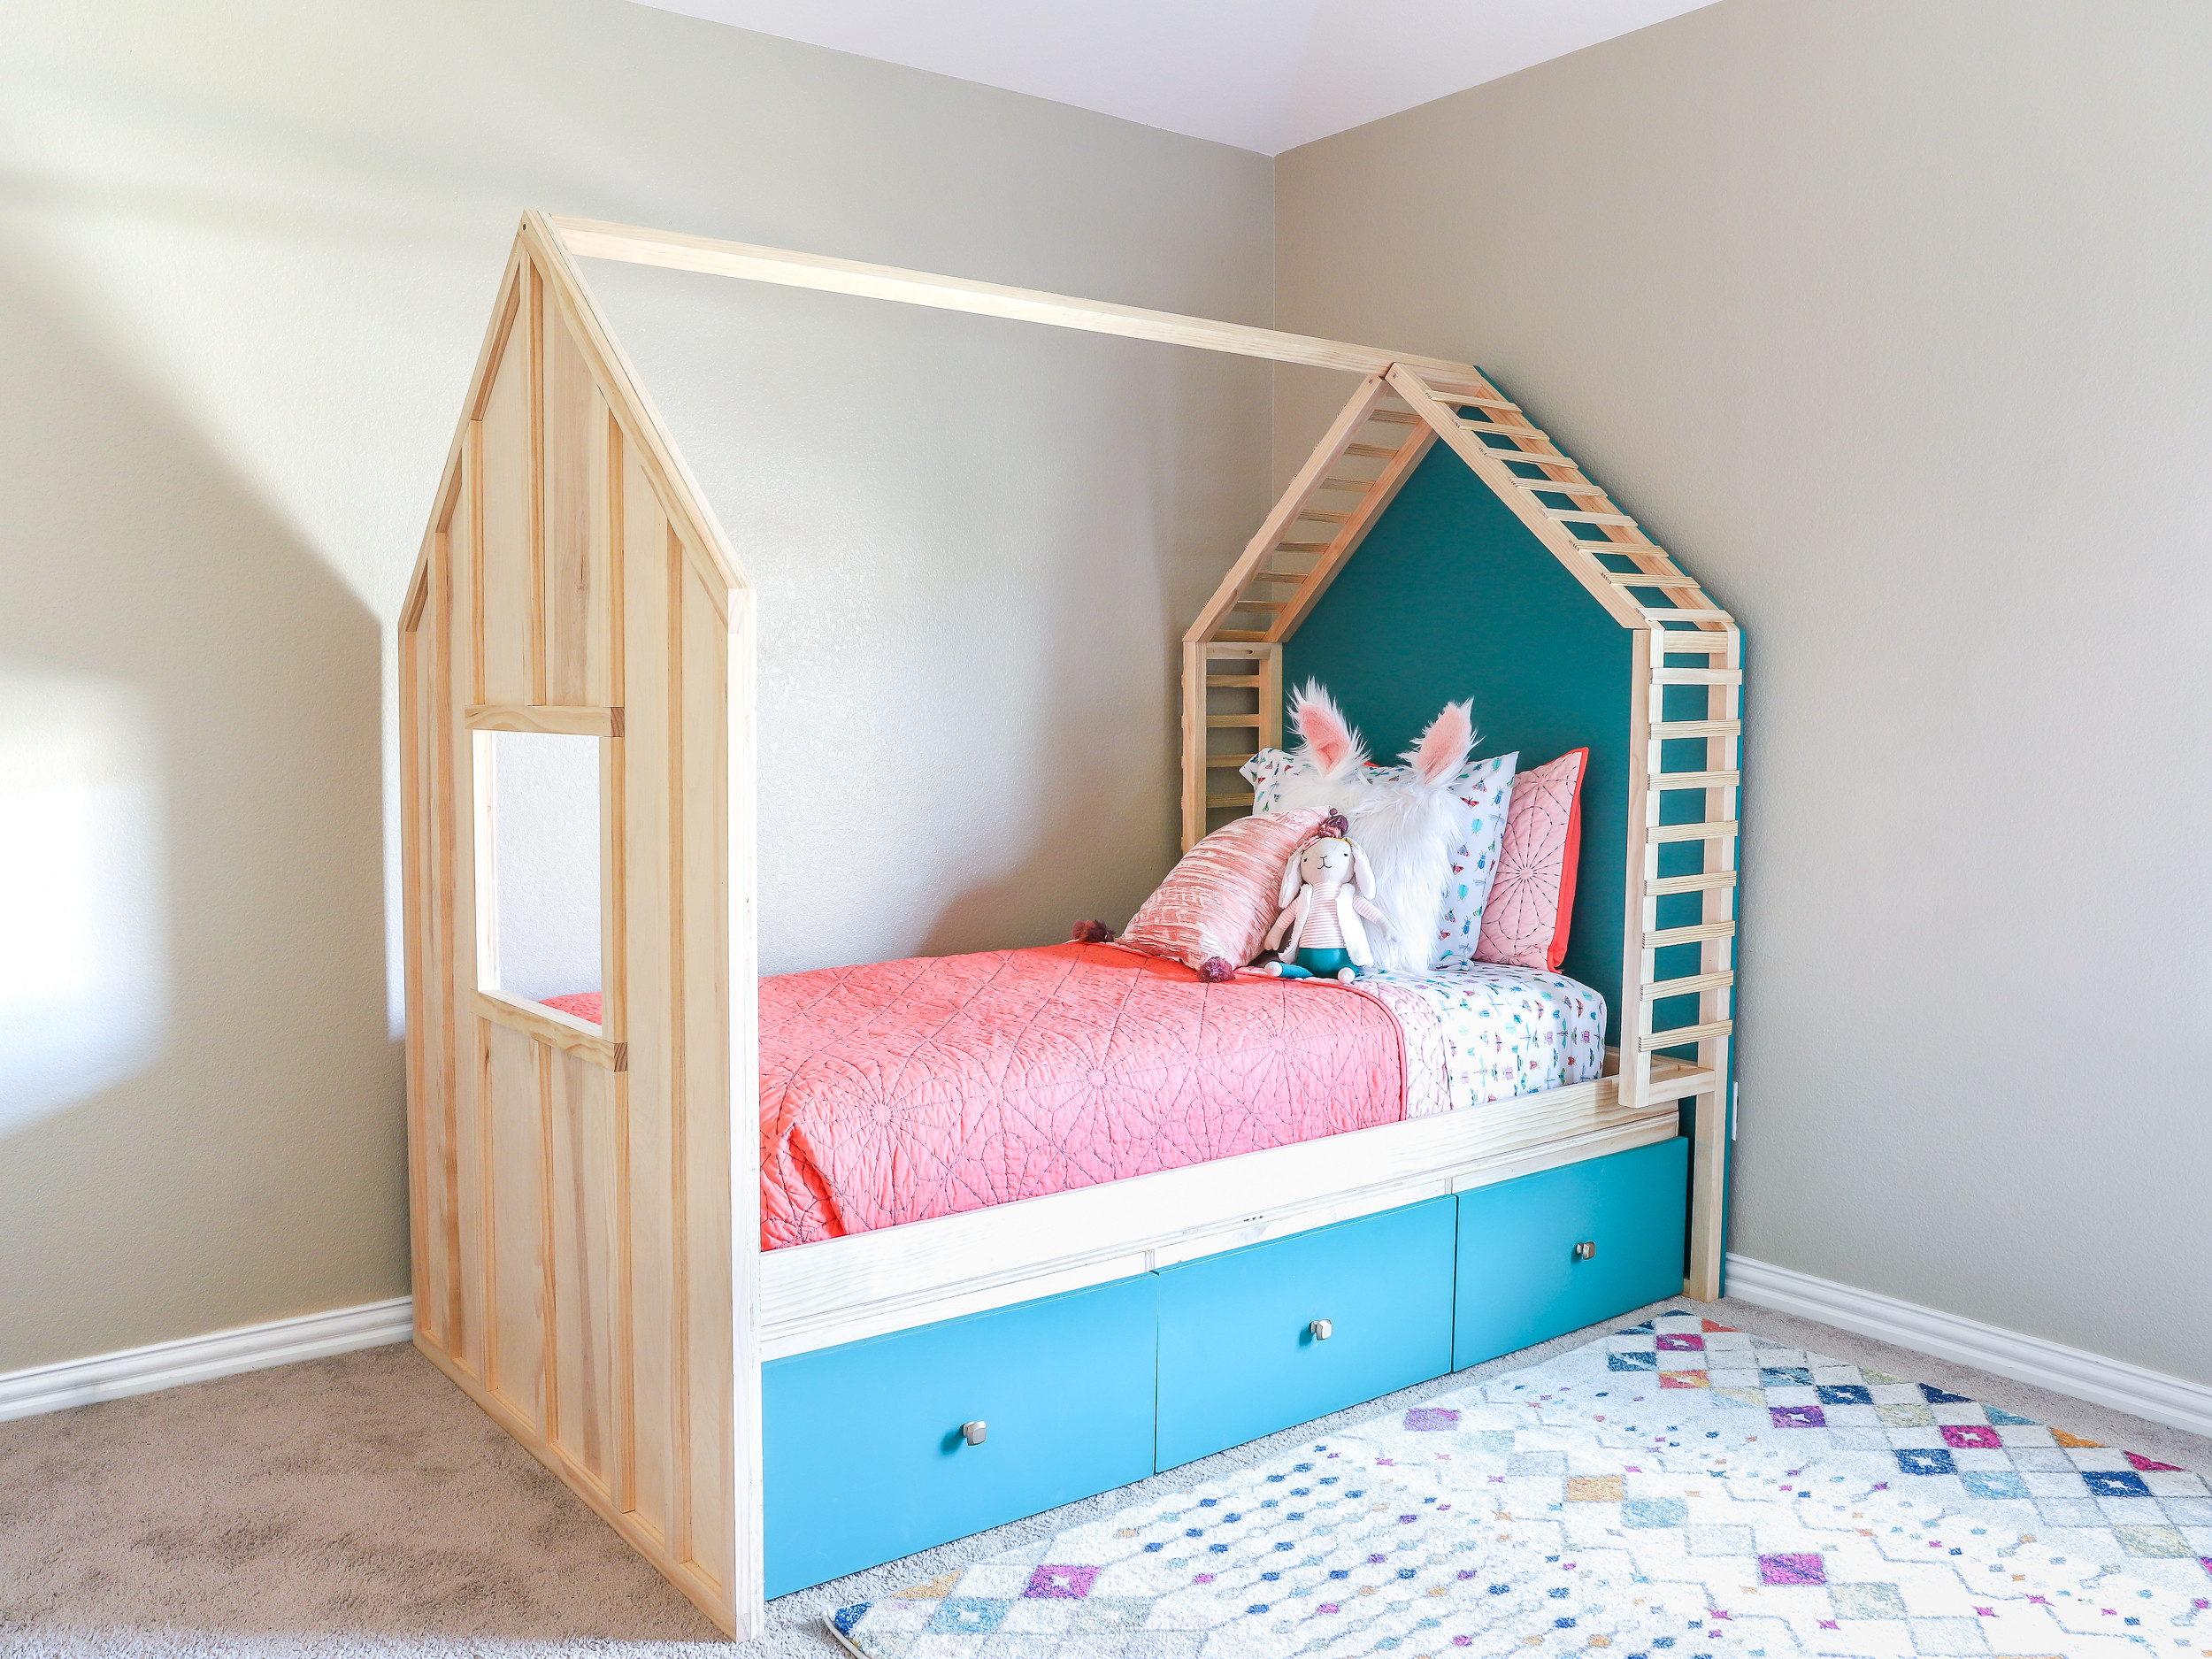 DIY Kids Bed With Storage
 How to build a DIY kids house bed with storage build